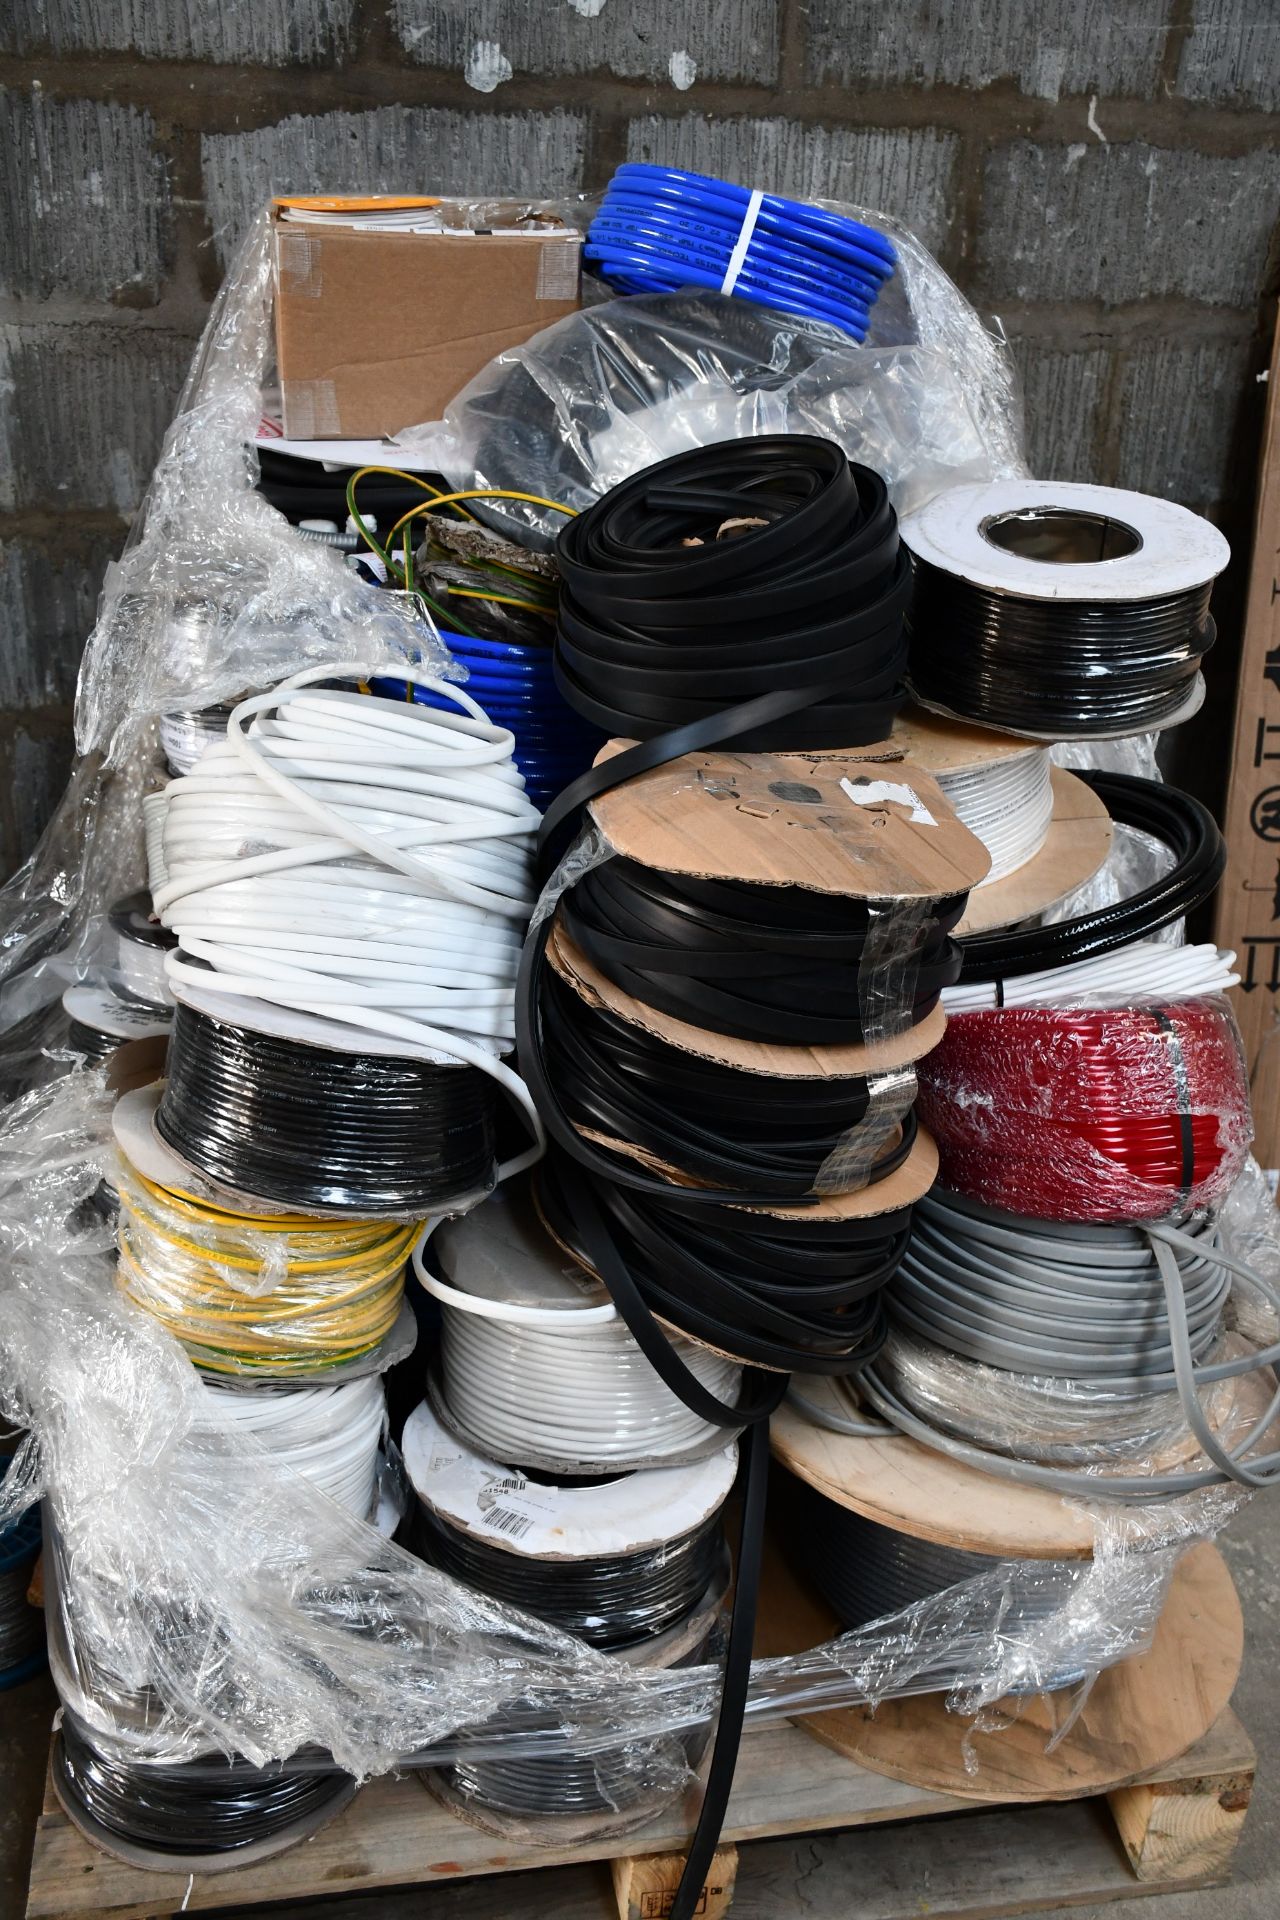 A pallet of miscellaneous wire/cabling.